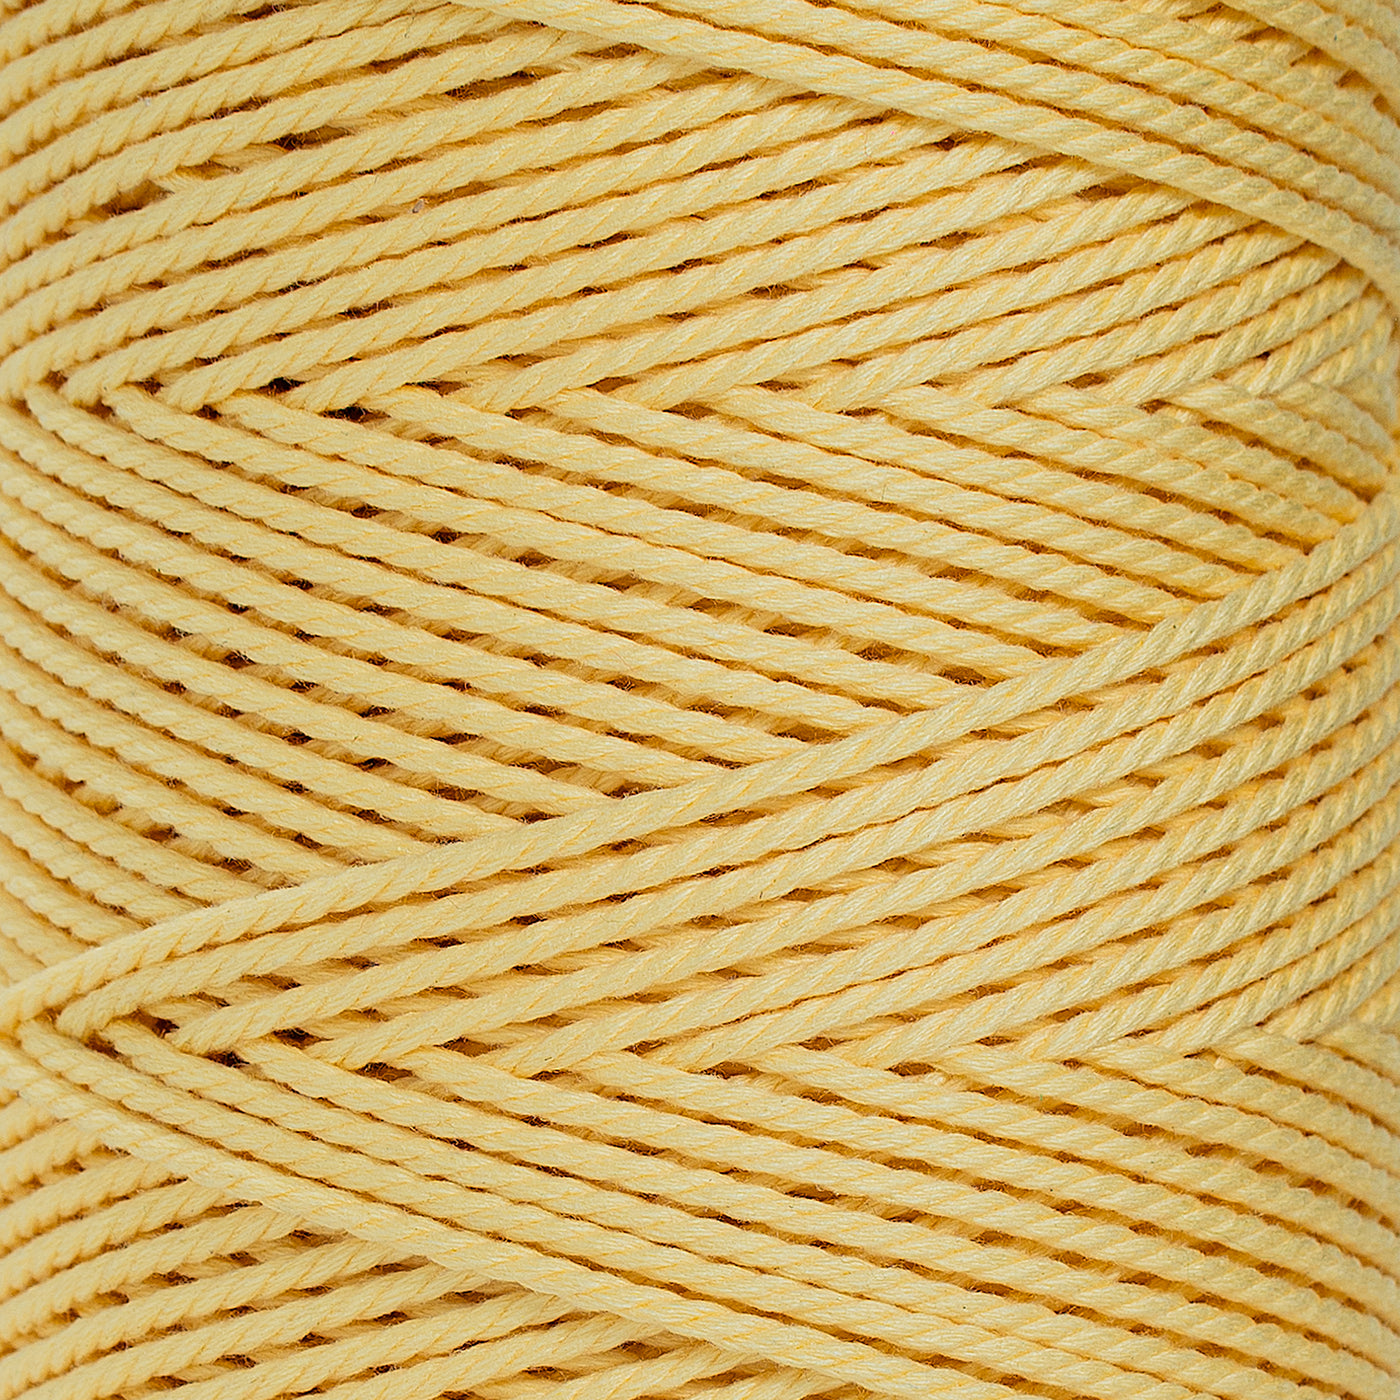 COTTON ROPE ZERO WASTE 2 MM - 3 PLY - MELLOW YELLOW COLOR